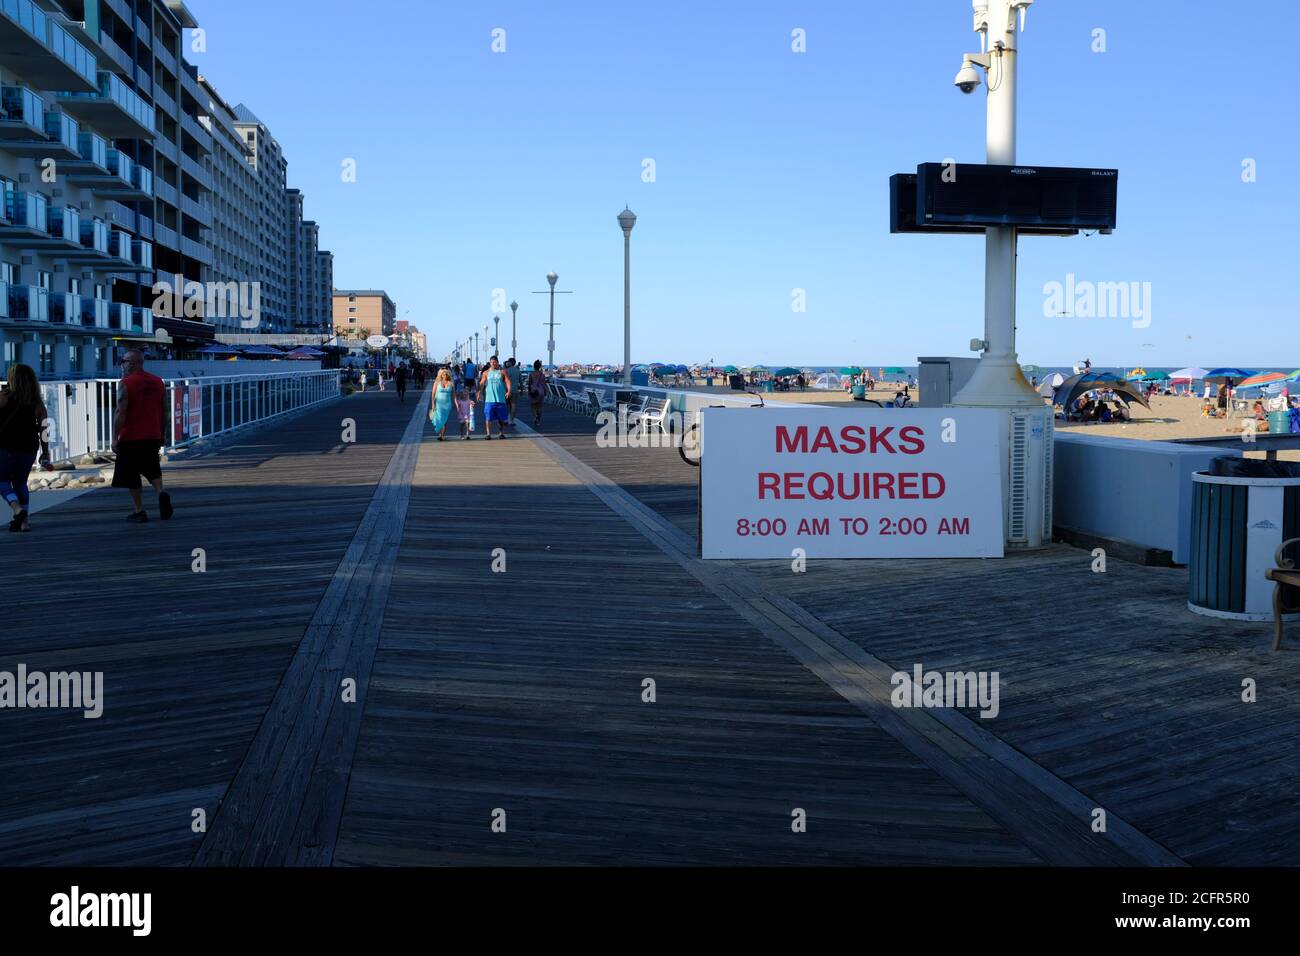 Ocean City Maryland Boardwalk on Labor Day Weekend with Masks Required Sign.  People behind the sign are maskless Stock Photo